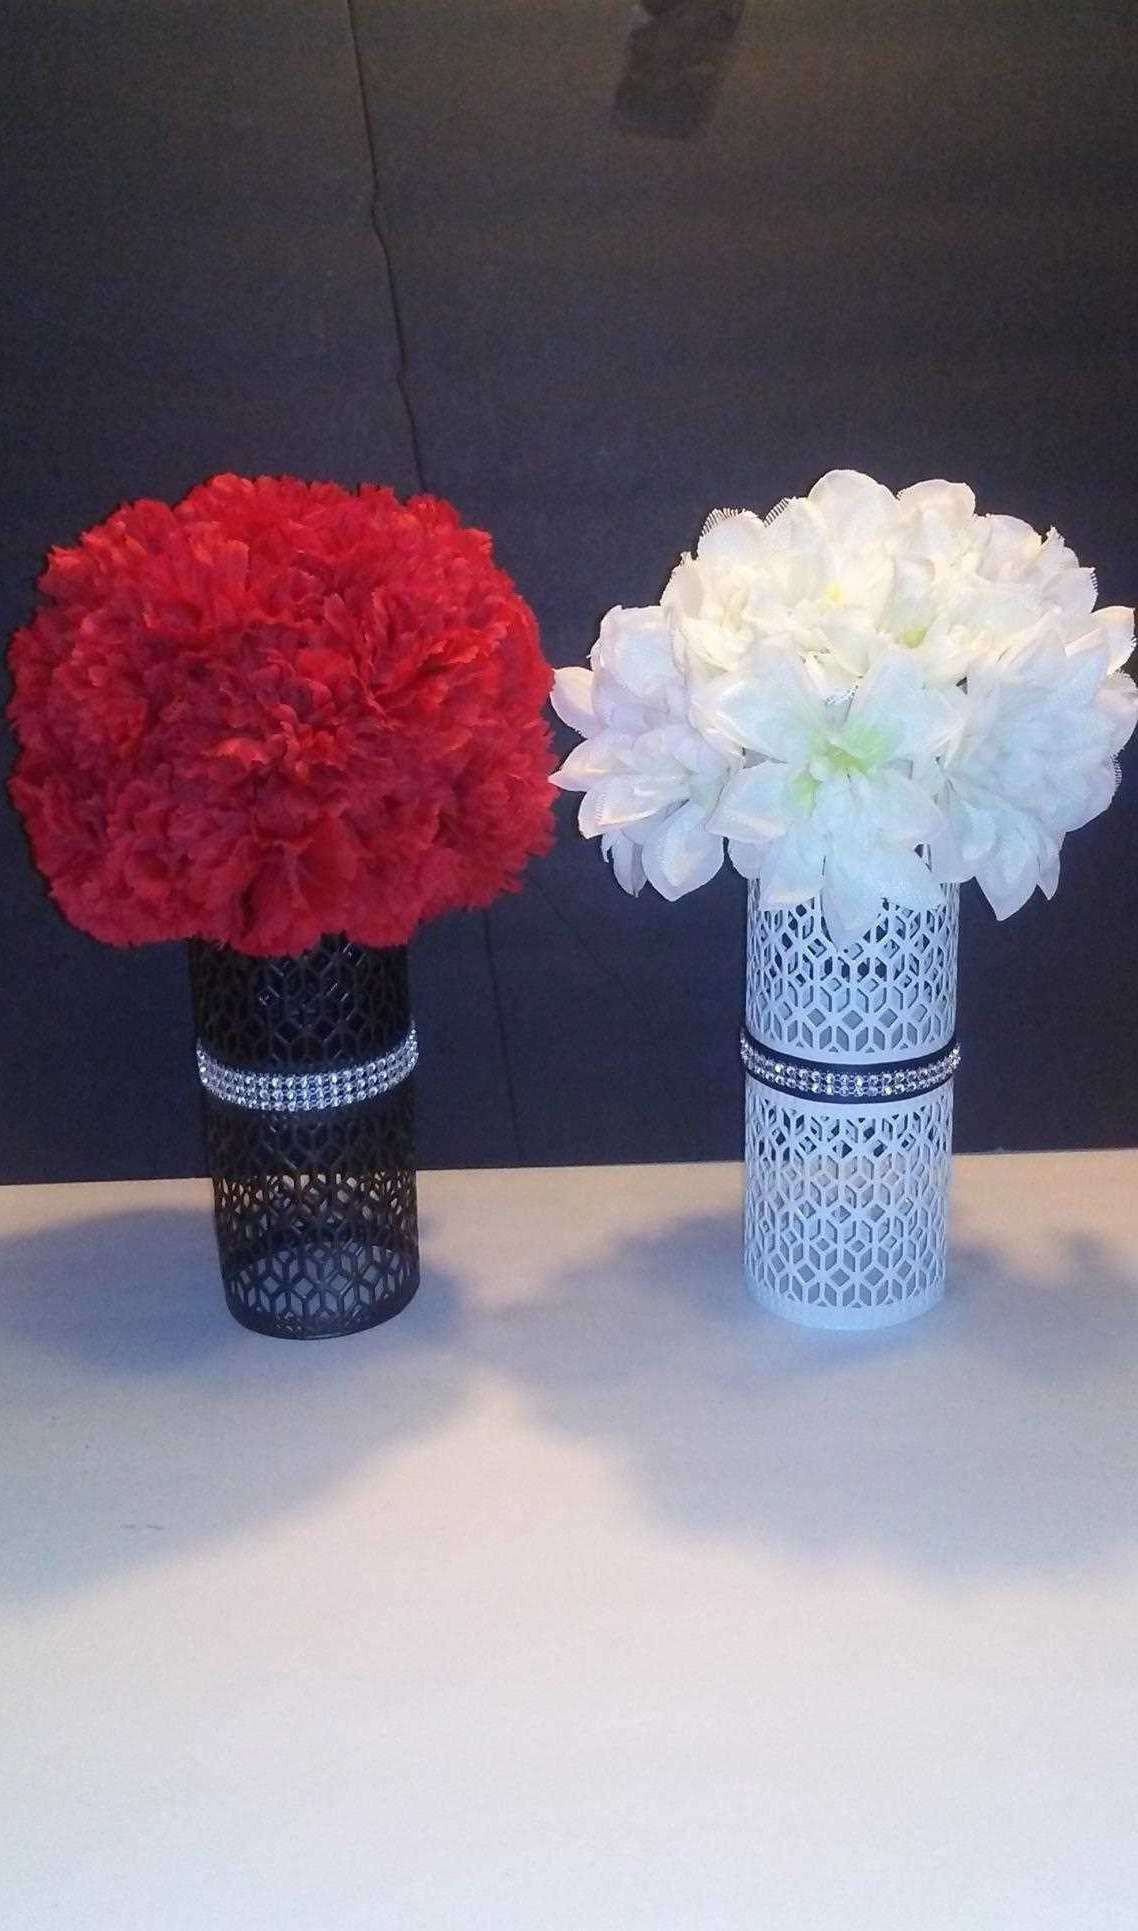 15 Lovely Vase Table Decorations 2024 free download vase table decorations of red table vases photograph dollar tree wedding decorations awesome h pertaining to red table vases photograph dollar tree wedding decorations awesome h vases dollar